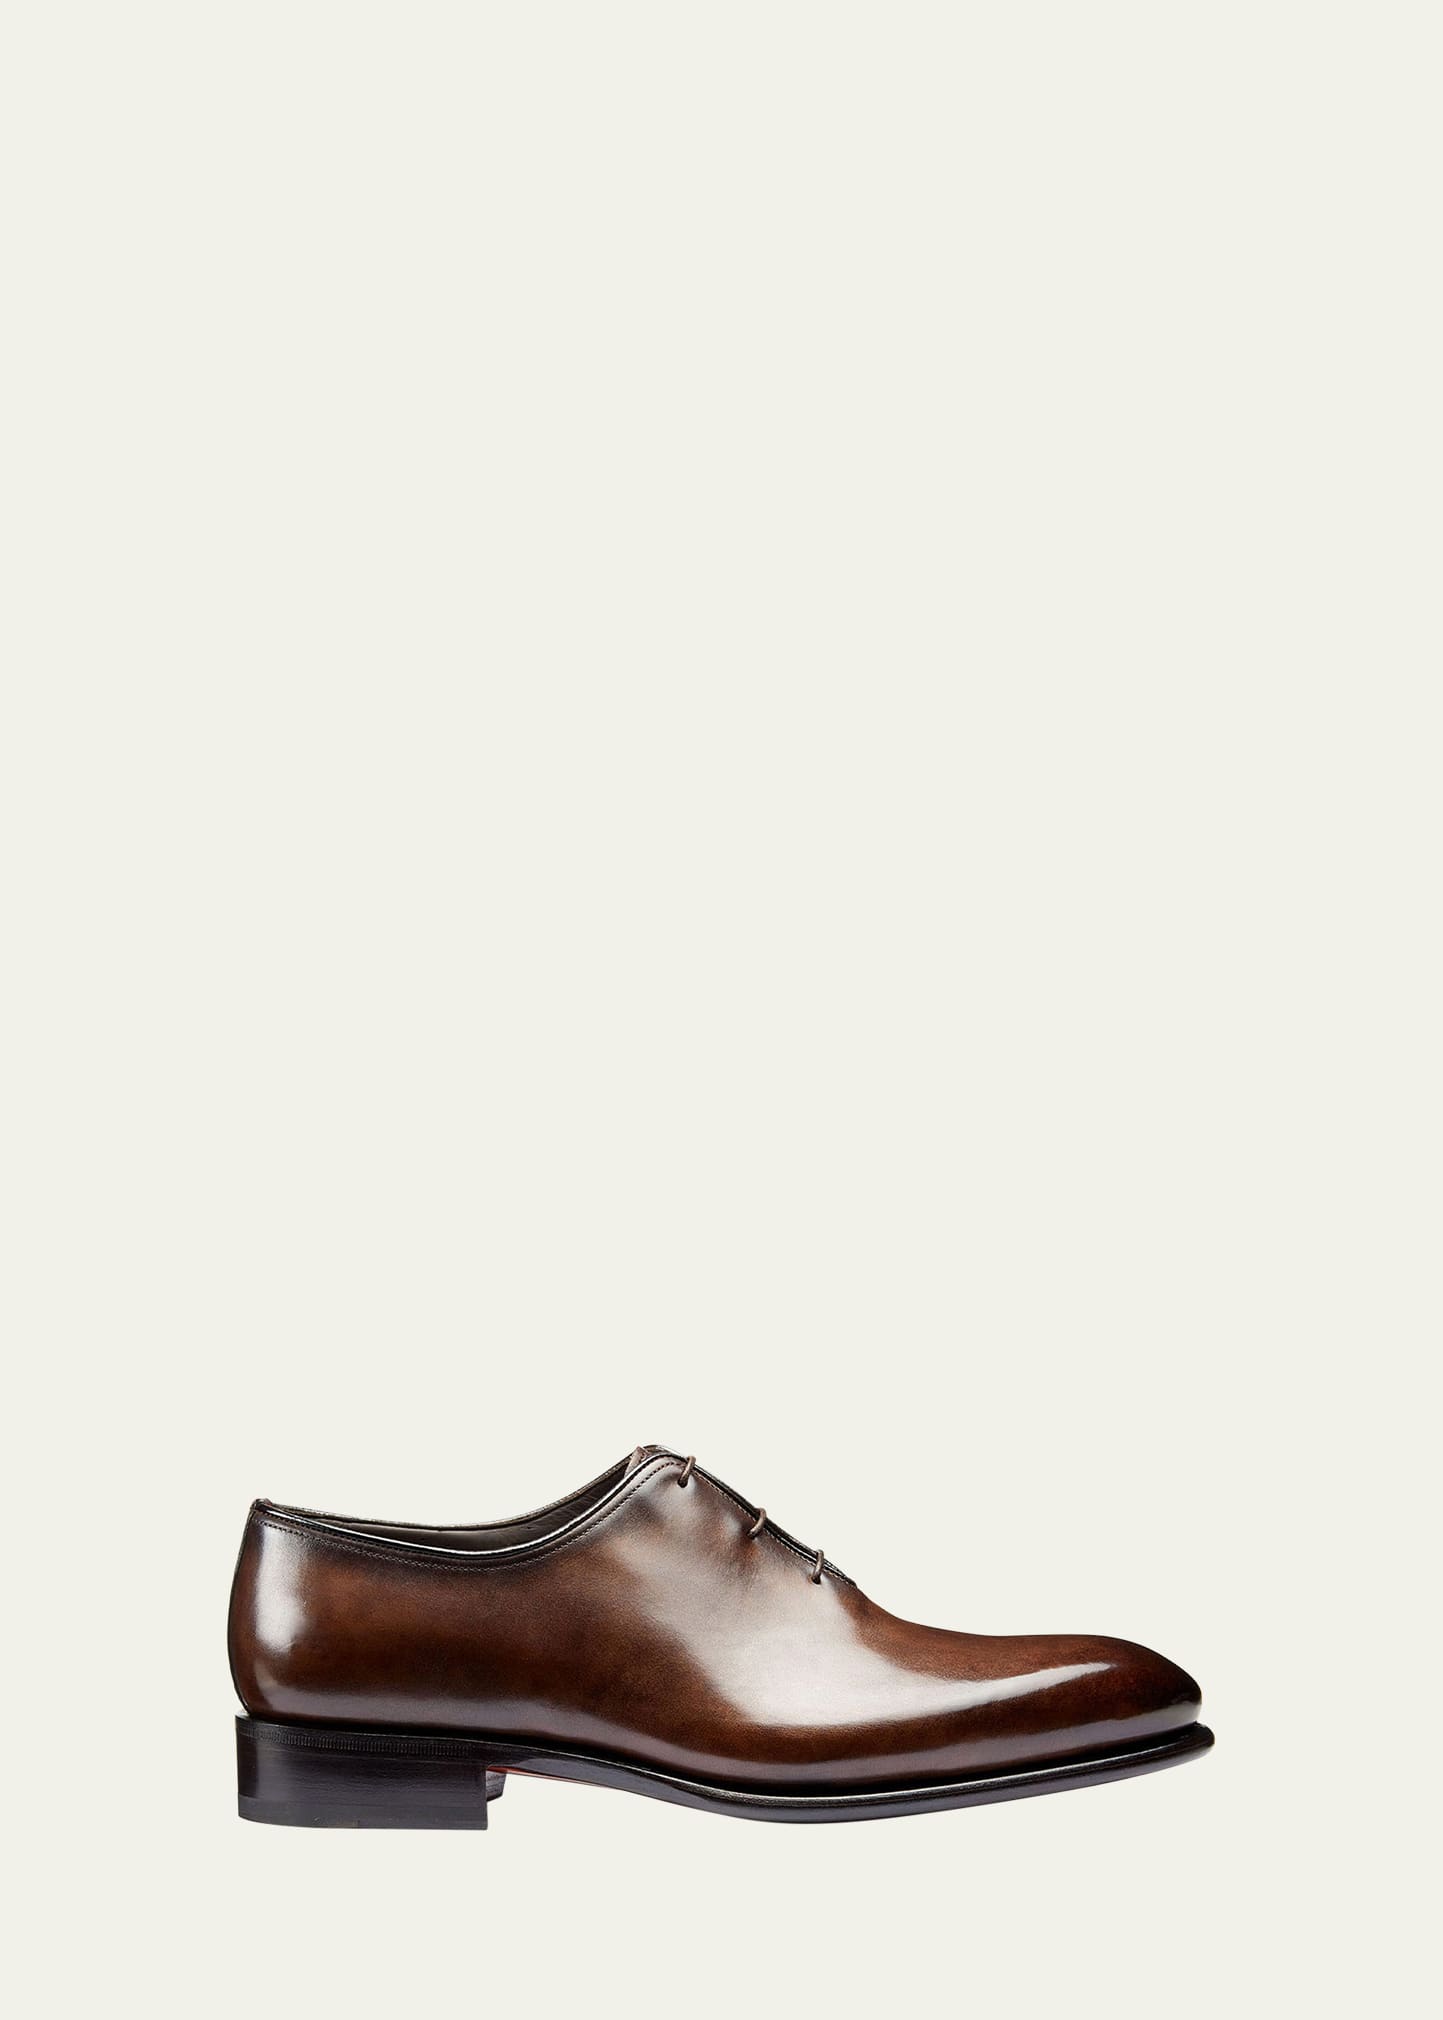 Men's People Leather Dress Oxfords